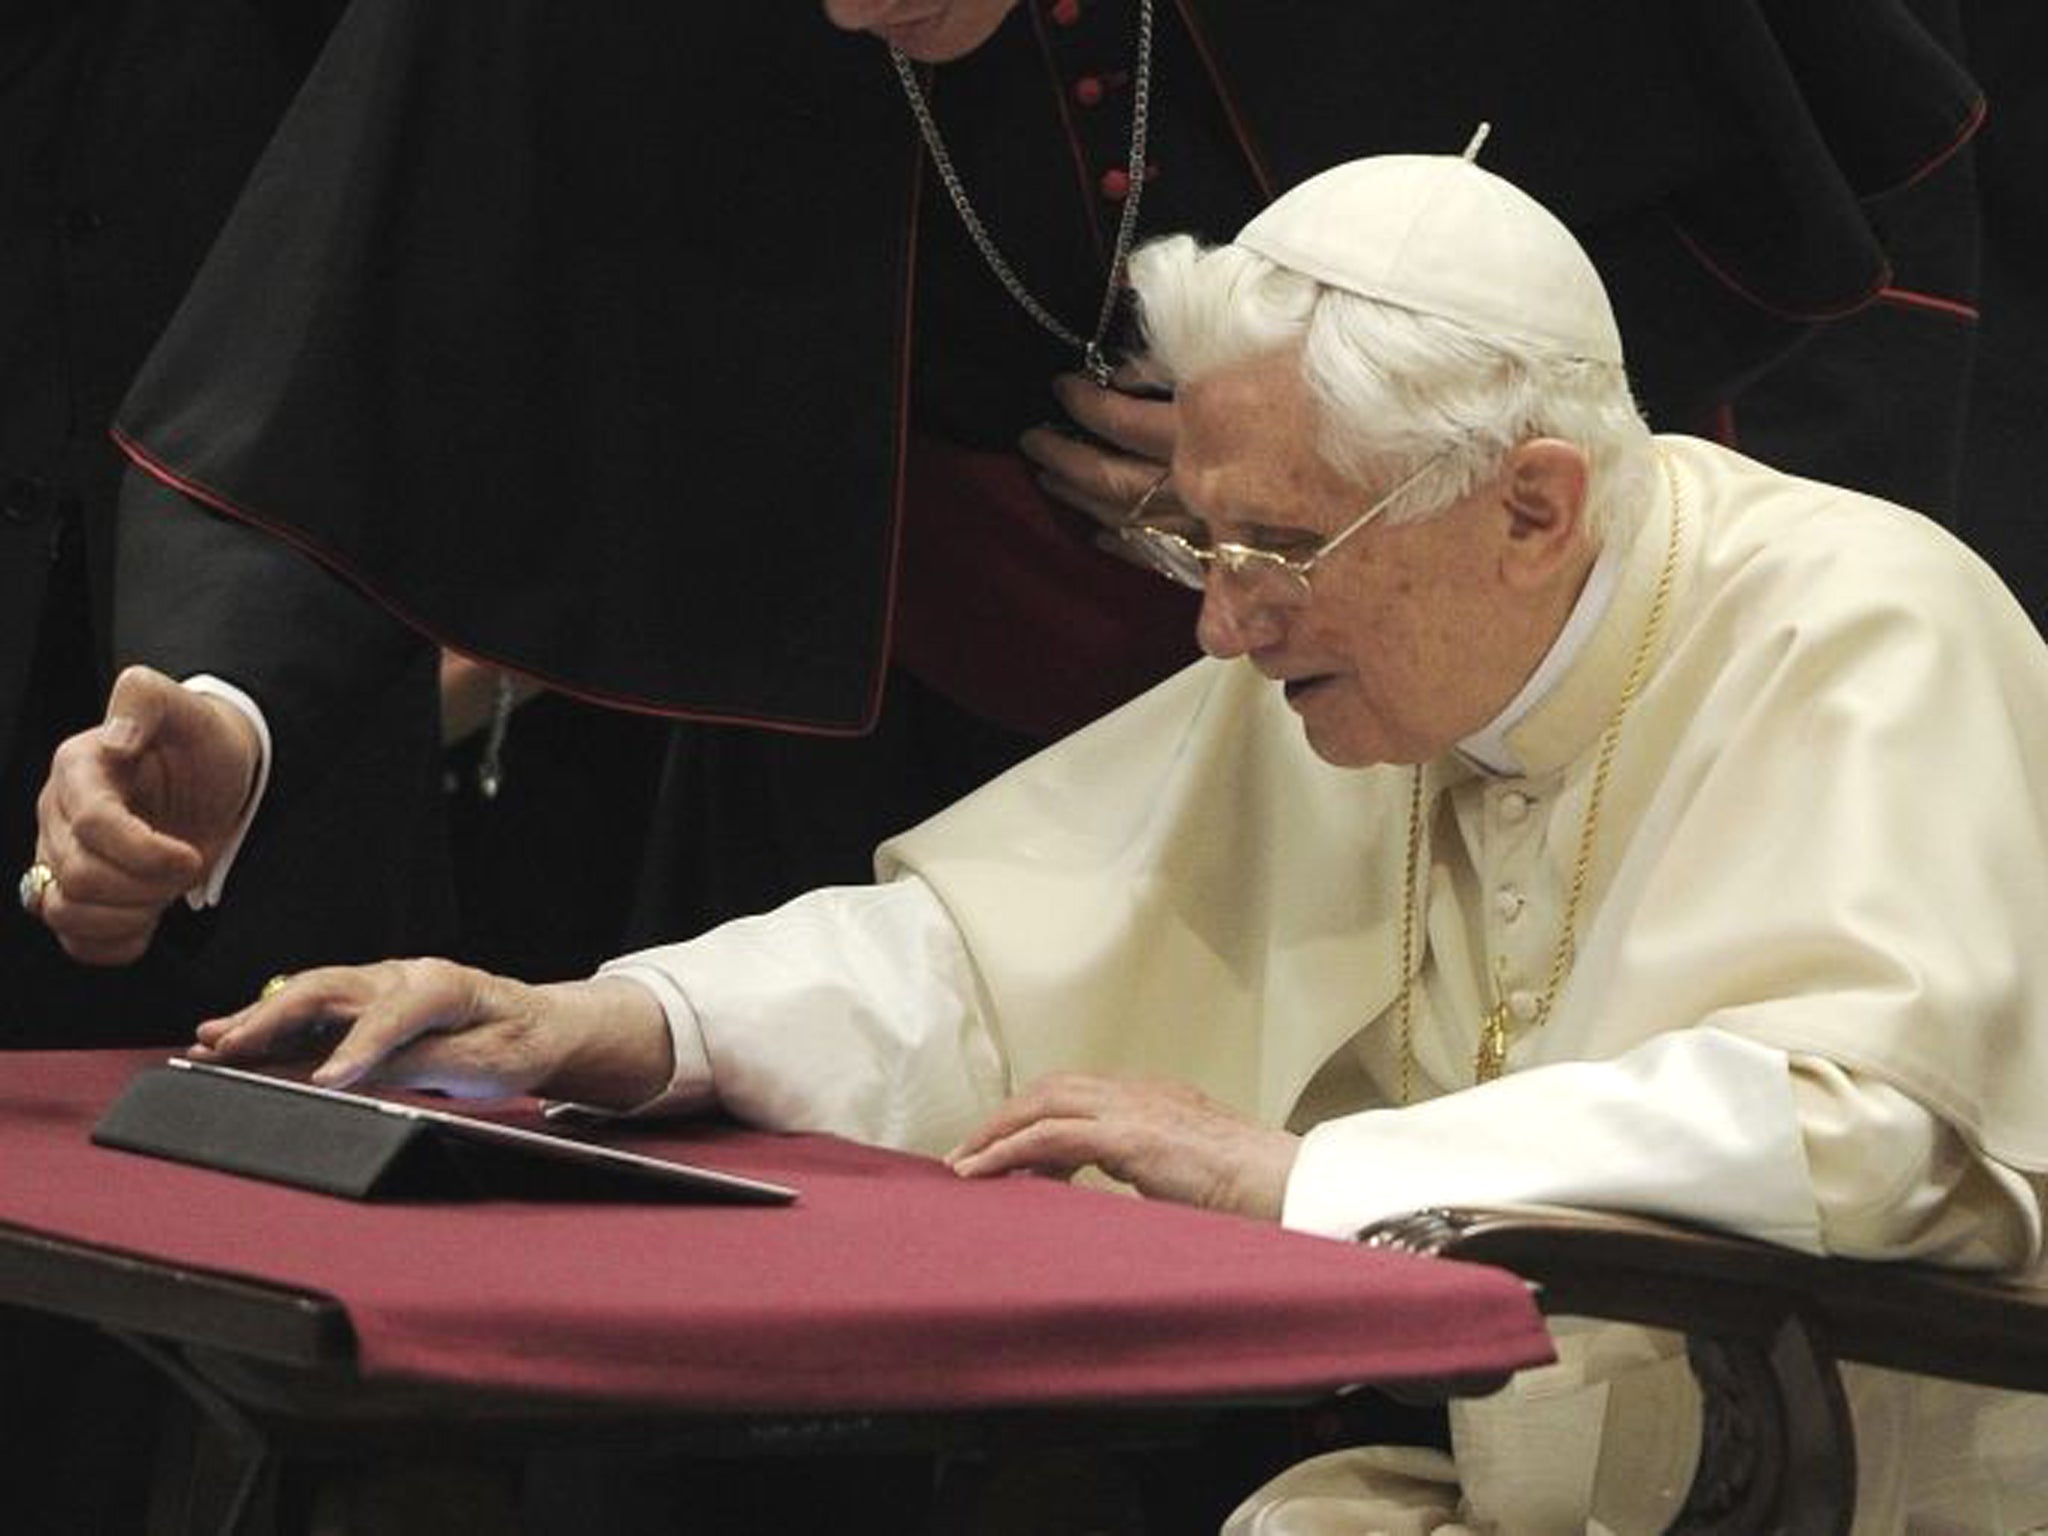 Pope Benedict XVI for the first time publishes a post on the social platform service Twitter